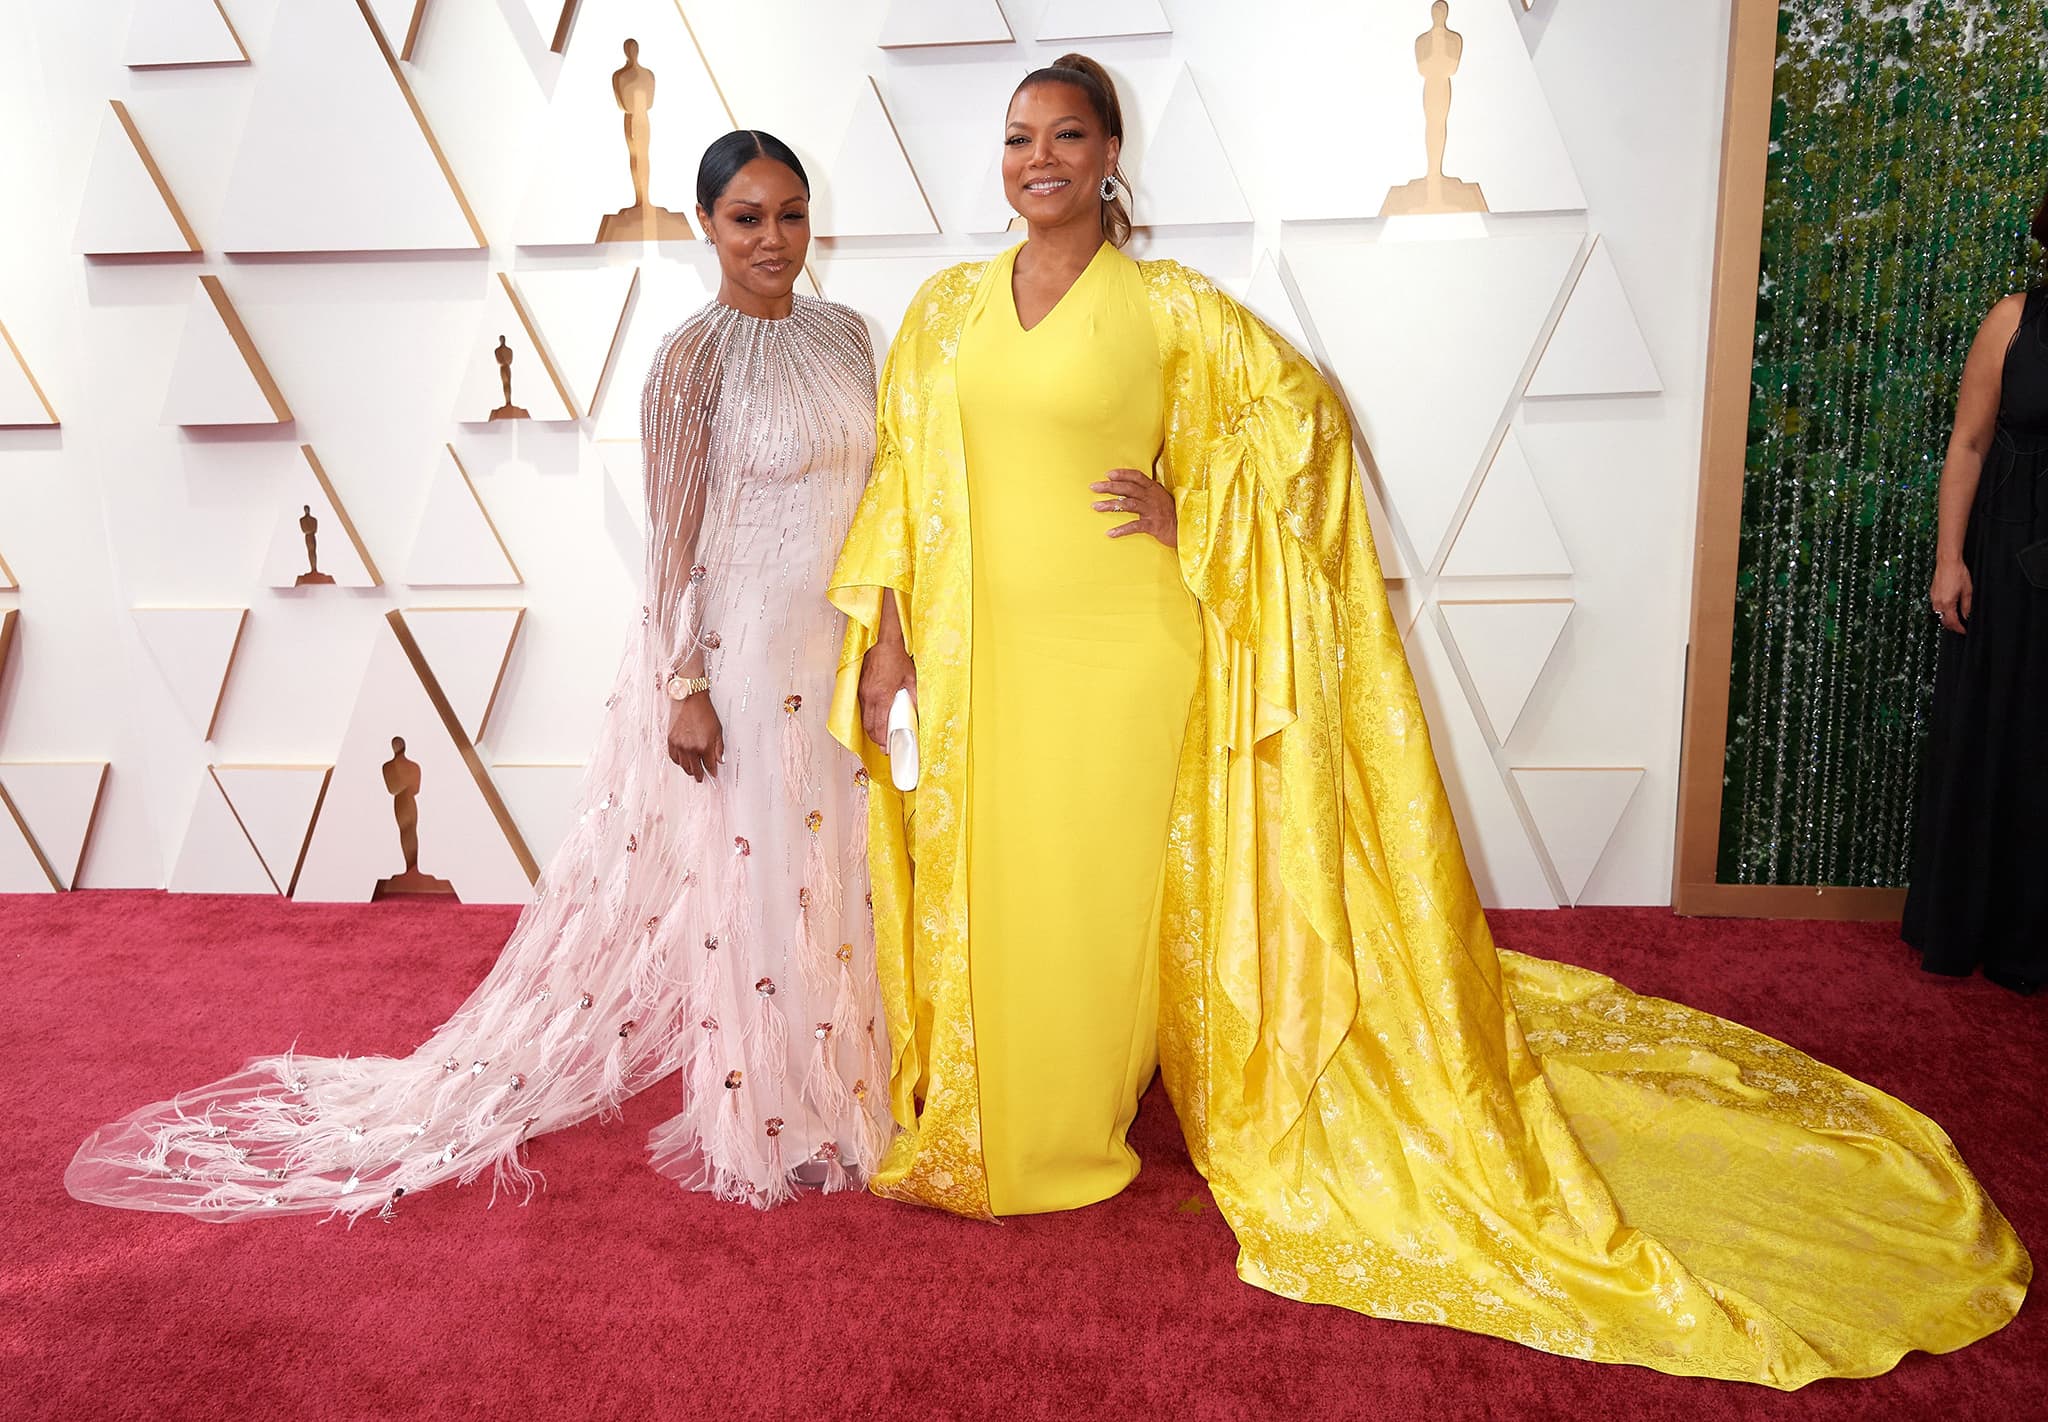 Eboni Nichols And Queen Latifah At The 94Th Academy Awards Held At The Dolby Theater At Ovation Hollywood In Los Angeles On March 27, 2022.